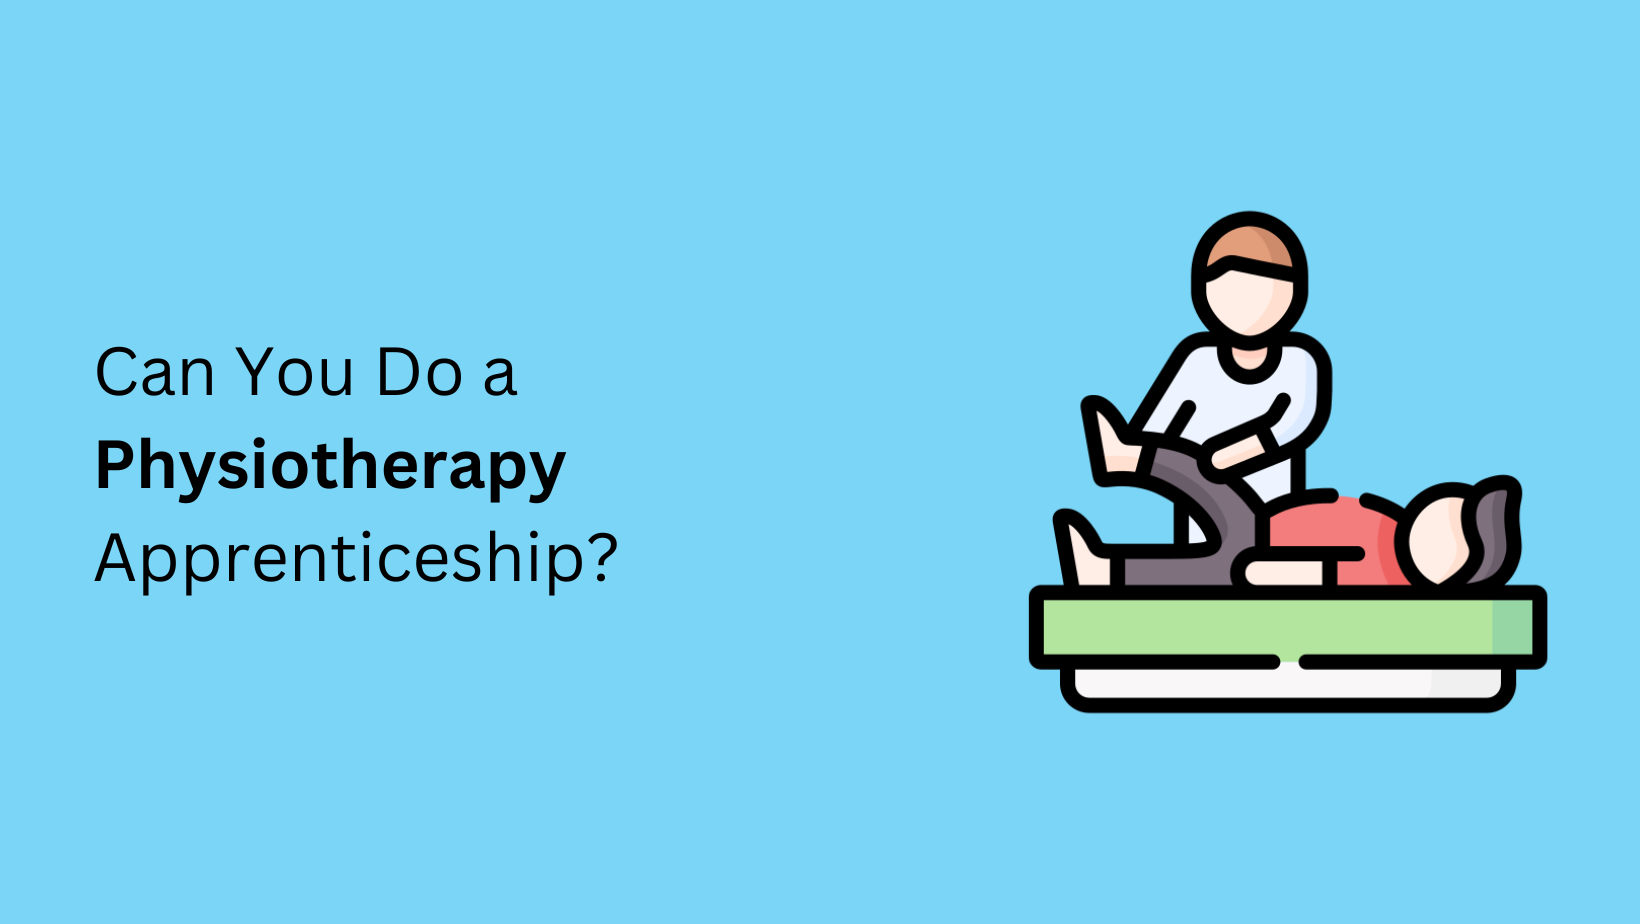 Can You Do a Physiotherapy Apprenticeship